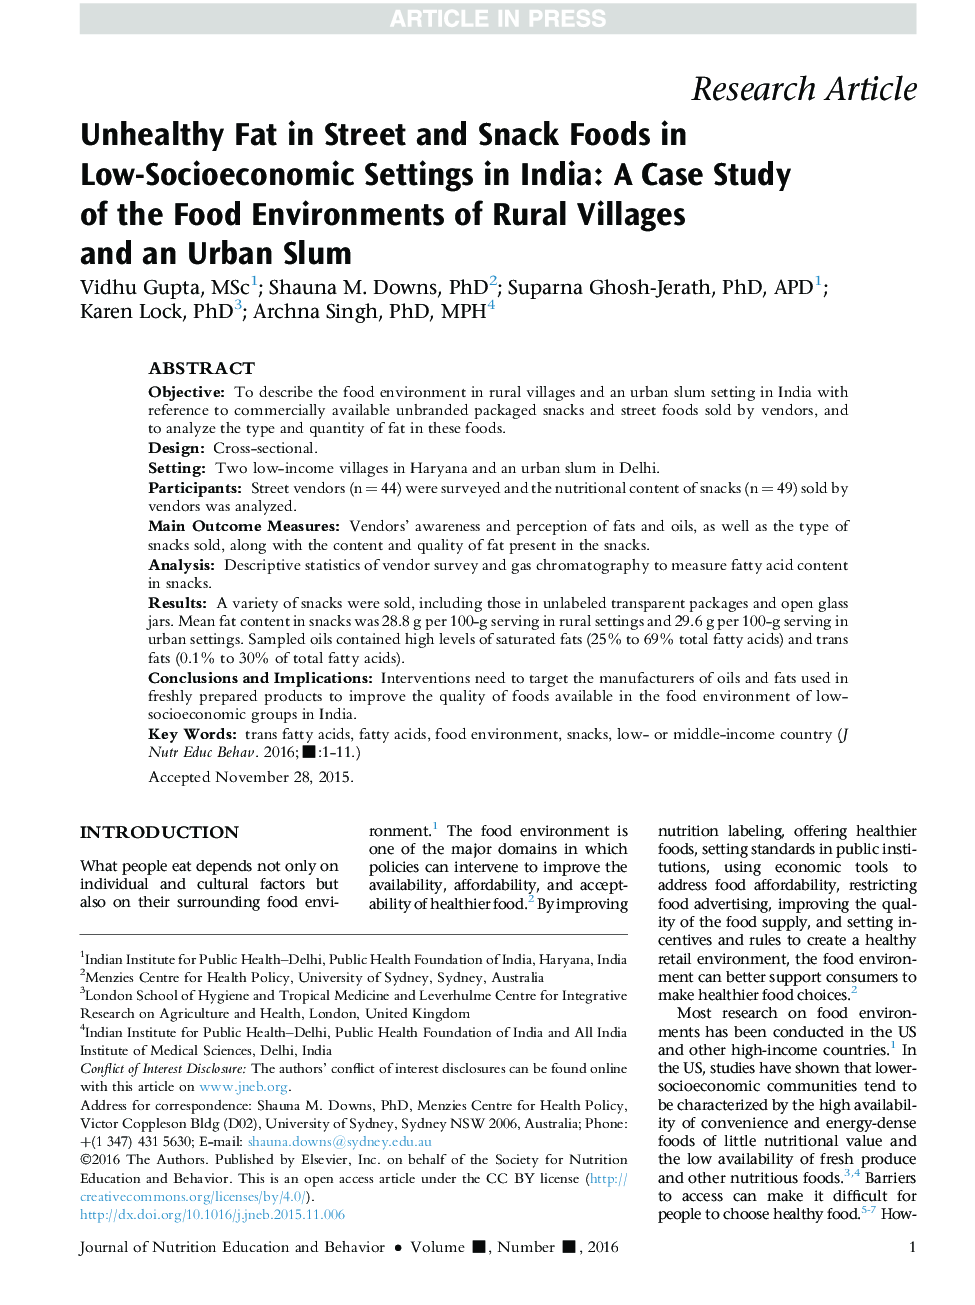 Unhealthy Fat in Street and Snack Foods in Low-Socioeconomic Settings in India: A Case Study of the Food Environments of Rural Villages and an Urban Slum